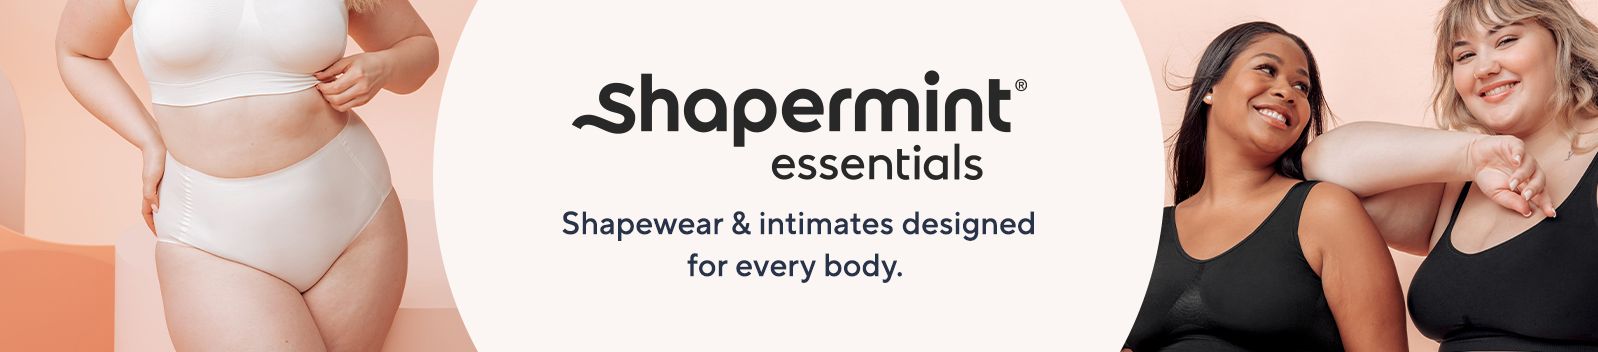 Shapermint, Accessories